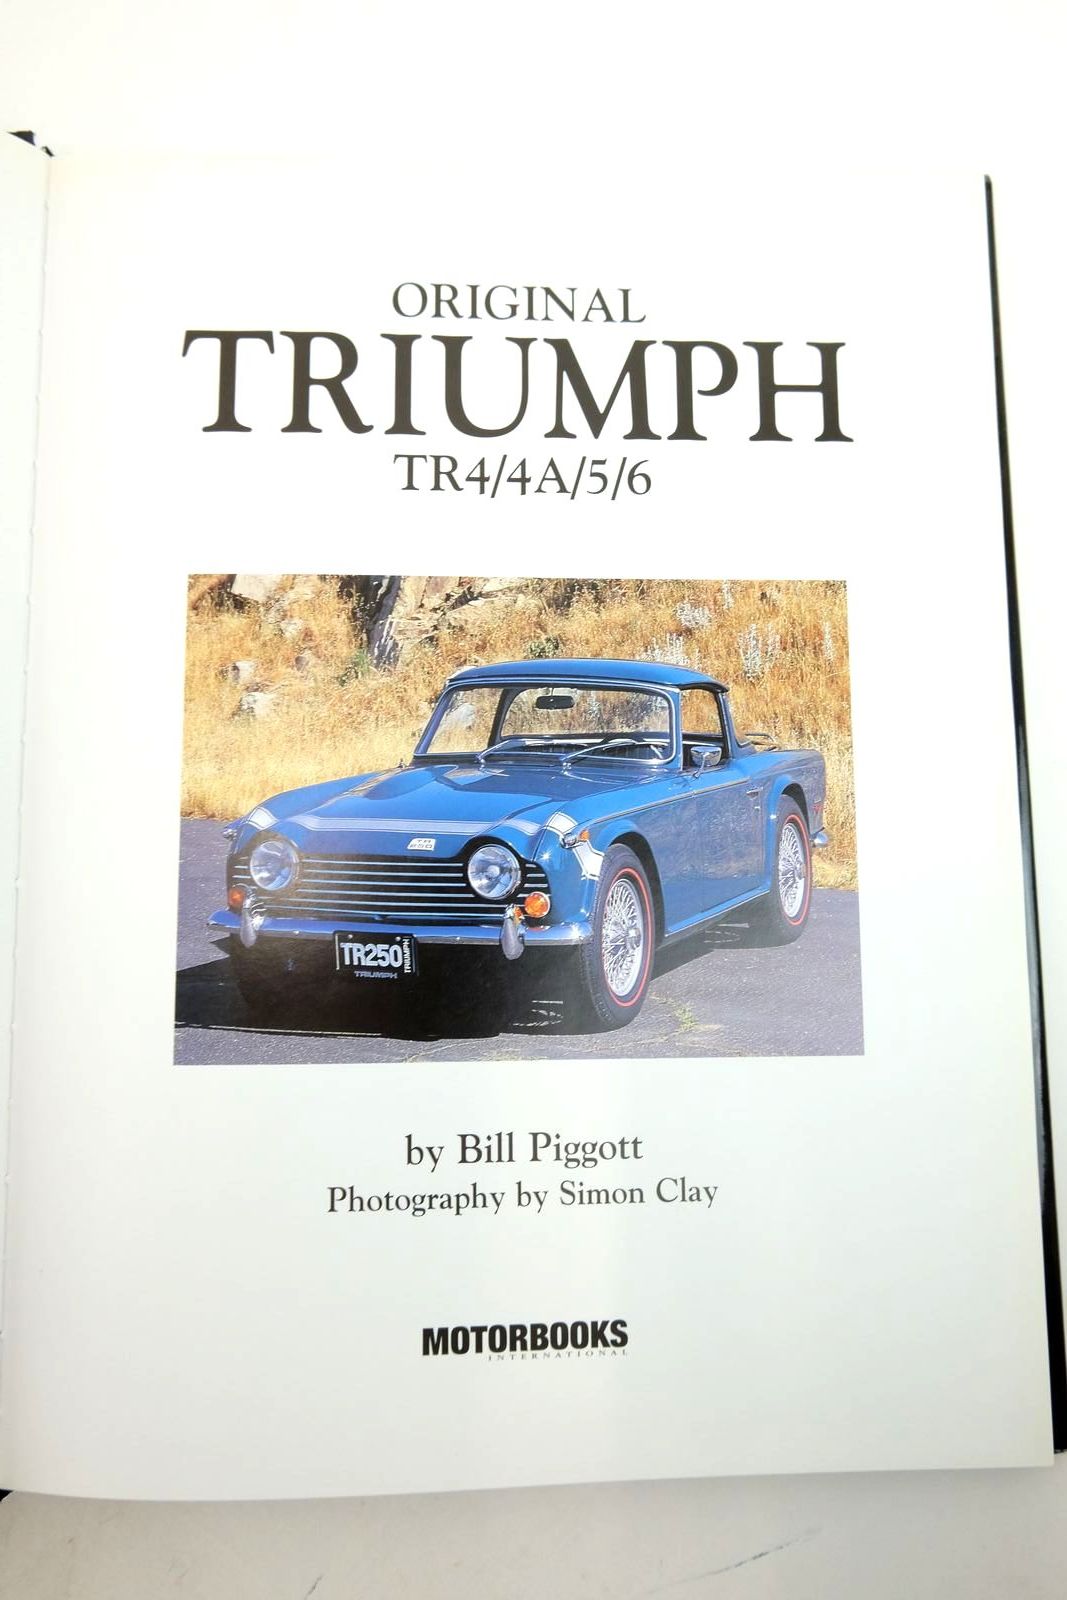 Photo of HAYNES RESTORATION MANUAL: TRIUMPH SPITFIRE GT6, VITESSE & HERALD written by Porter, Lindsay
Williams, Peter published by Haynes (STOCK CODE: 2134994)  for sale by Stella & Rose's Books